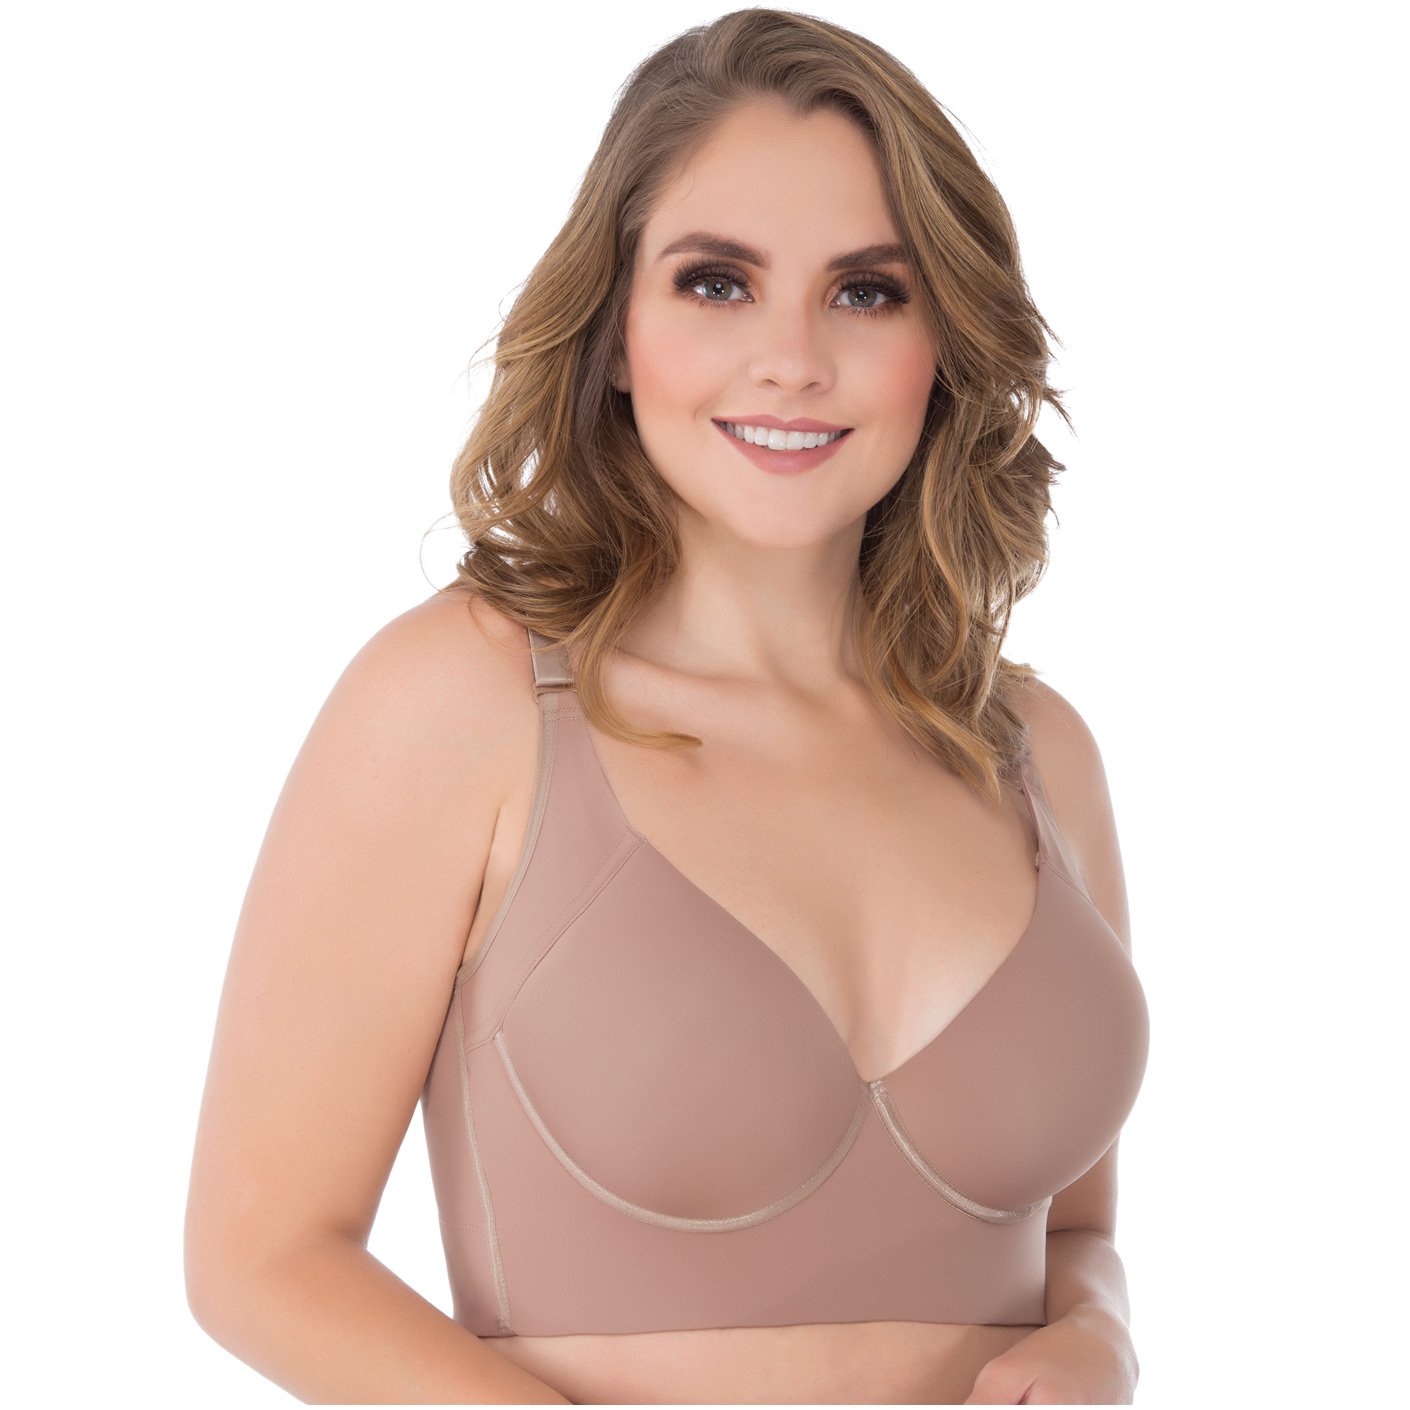 UPLADY 8034 FIRM CONTROL STRAPLESS BRA FOR WOMEN (Size: 36DD/L, Color:  Cocoa)